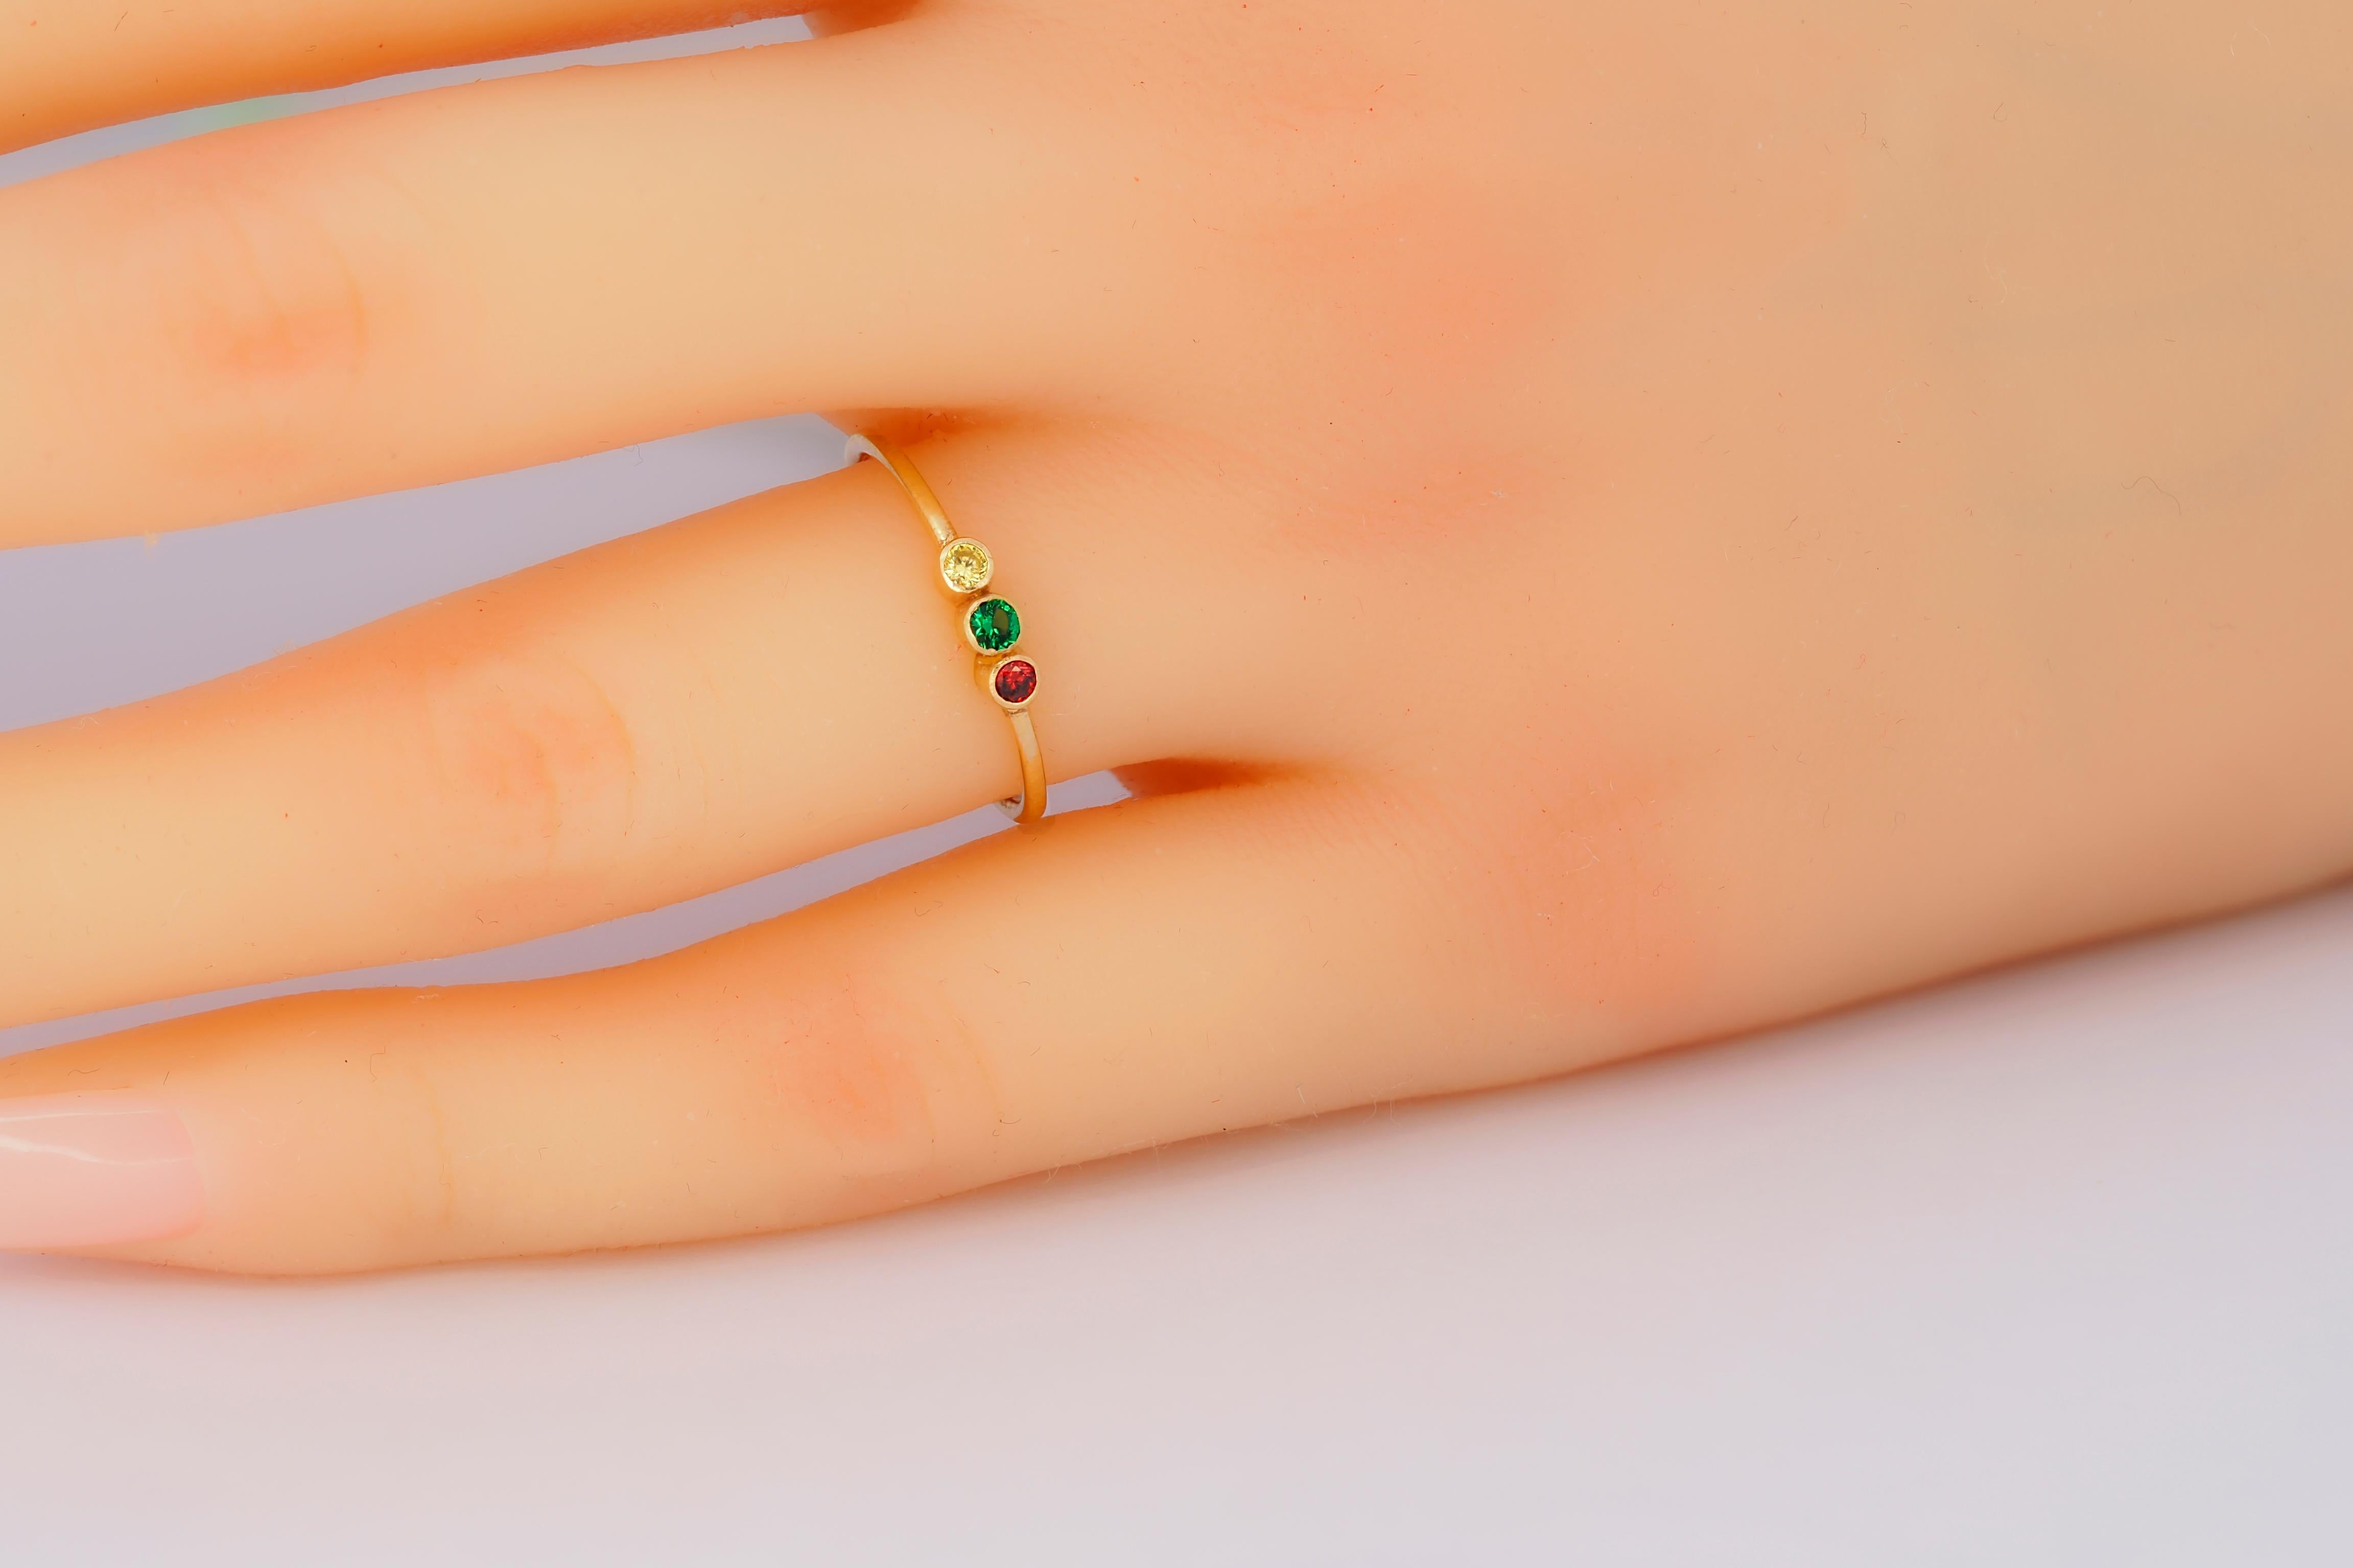 Three Stone 14k gold stakable ring.  Triple Stone Ring. Minimalist  green, red, yellow gemstone ring. Dainty gemstone Ring. Thin Band Ring. Stacking Band Ring.

Metal: 14k gold
Weight: 1.8 gr depends from size
Lab sapphire 1 stone, yellow color,